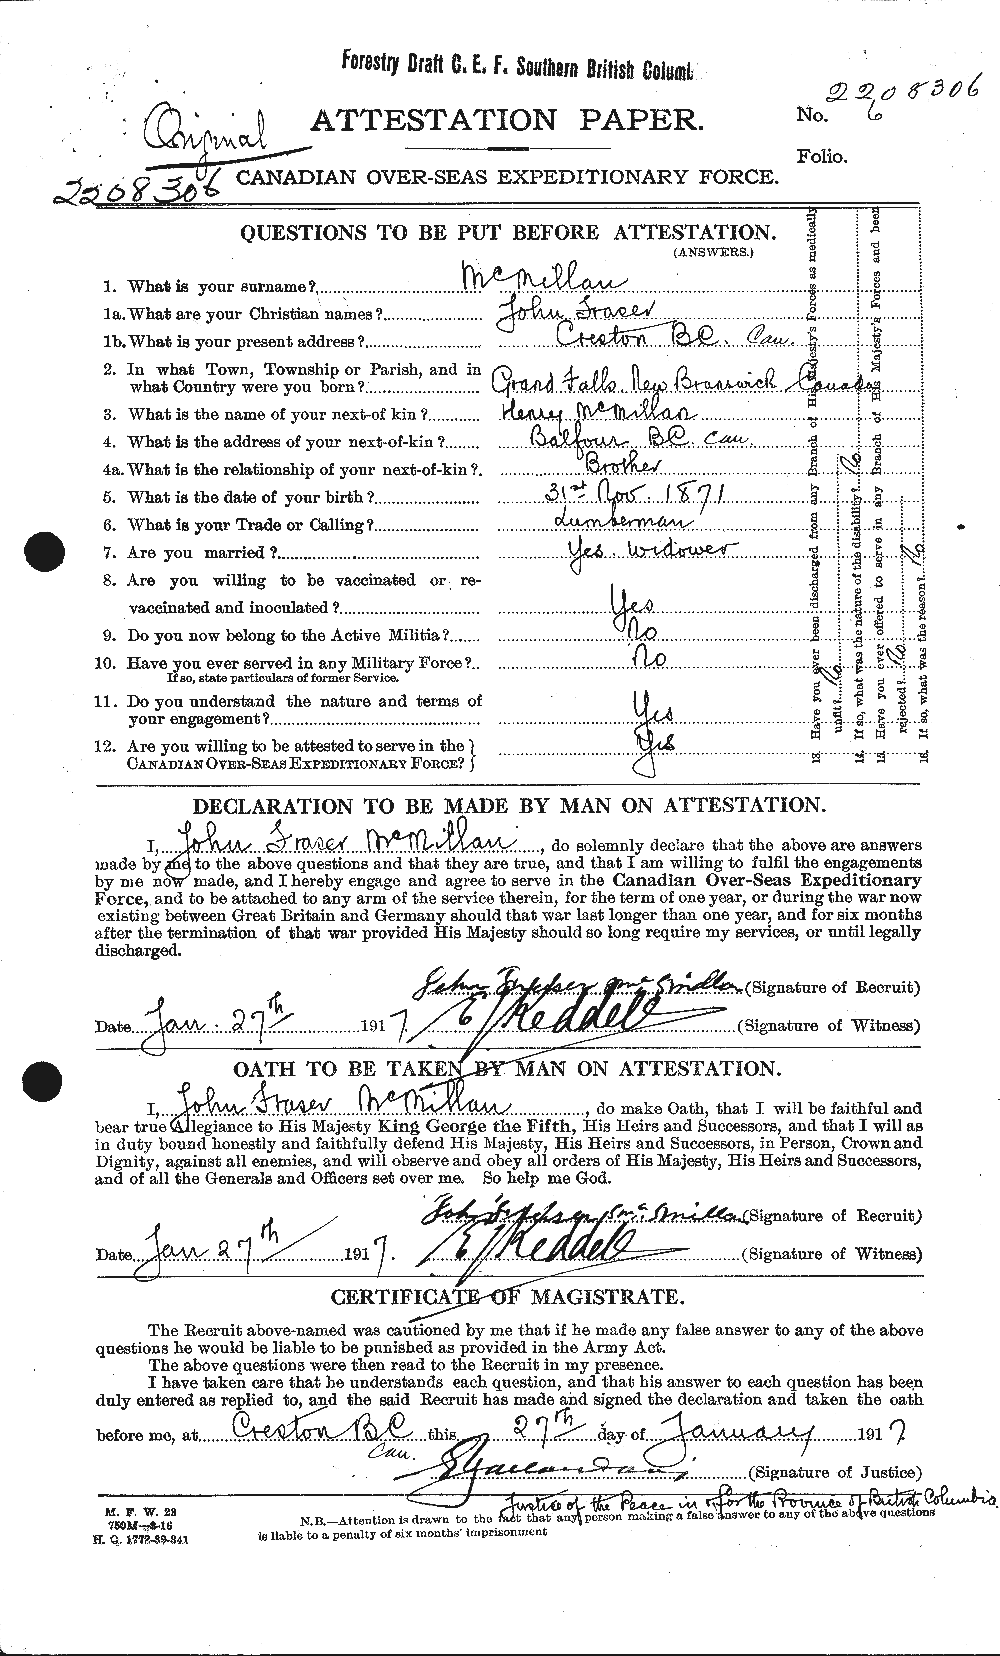 Personnel Records of the First World War - CEF 544033a